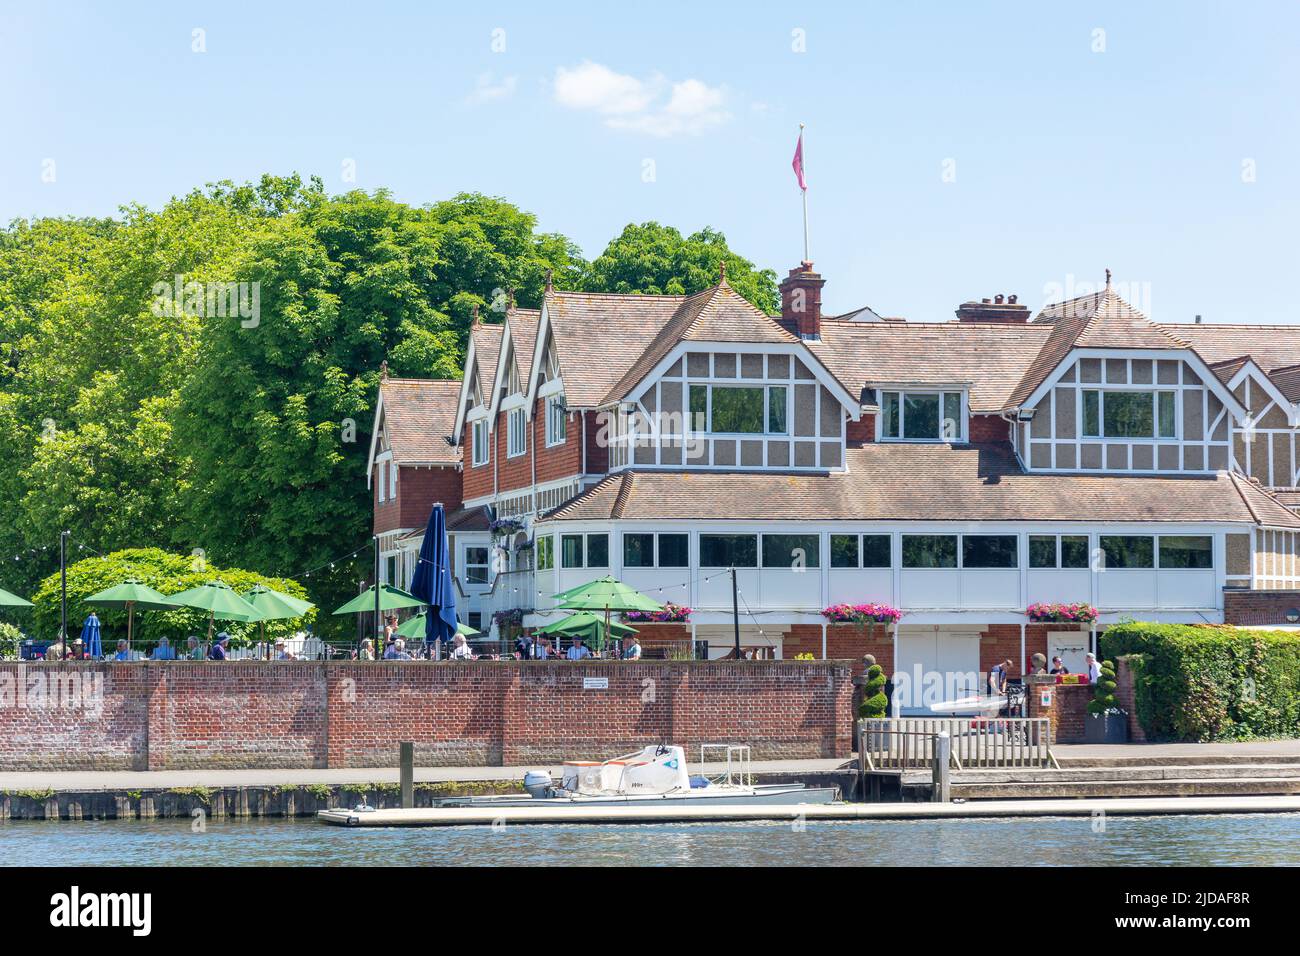 Leander Rowing Club on River Thames, Henley-on-Thames, Oxfordshire, England, United Kingdom Stock Photo